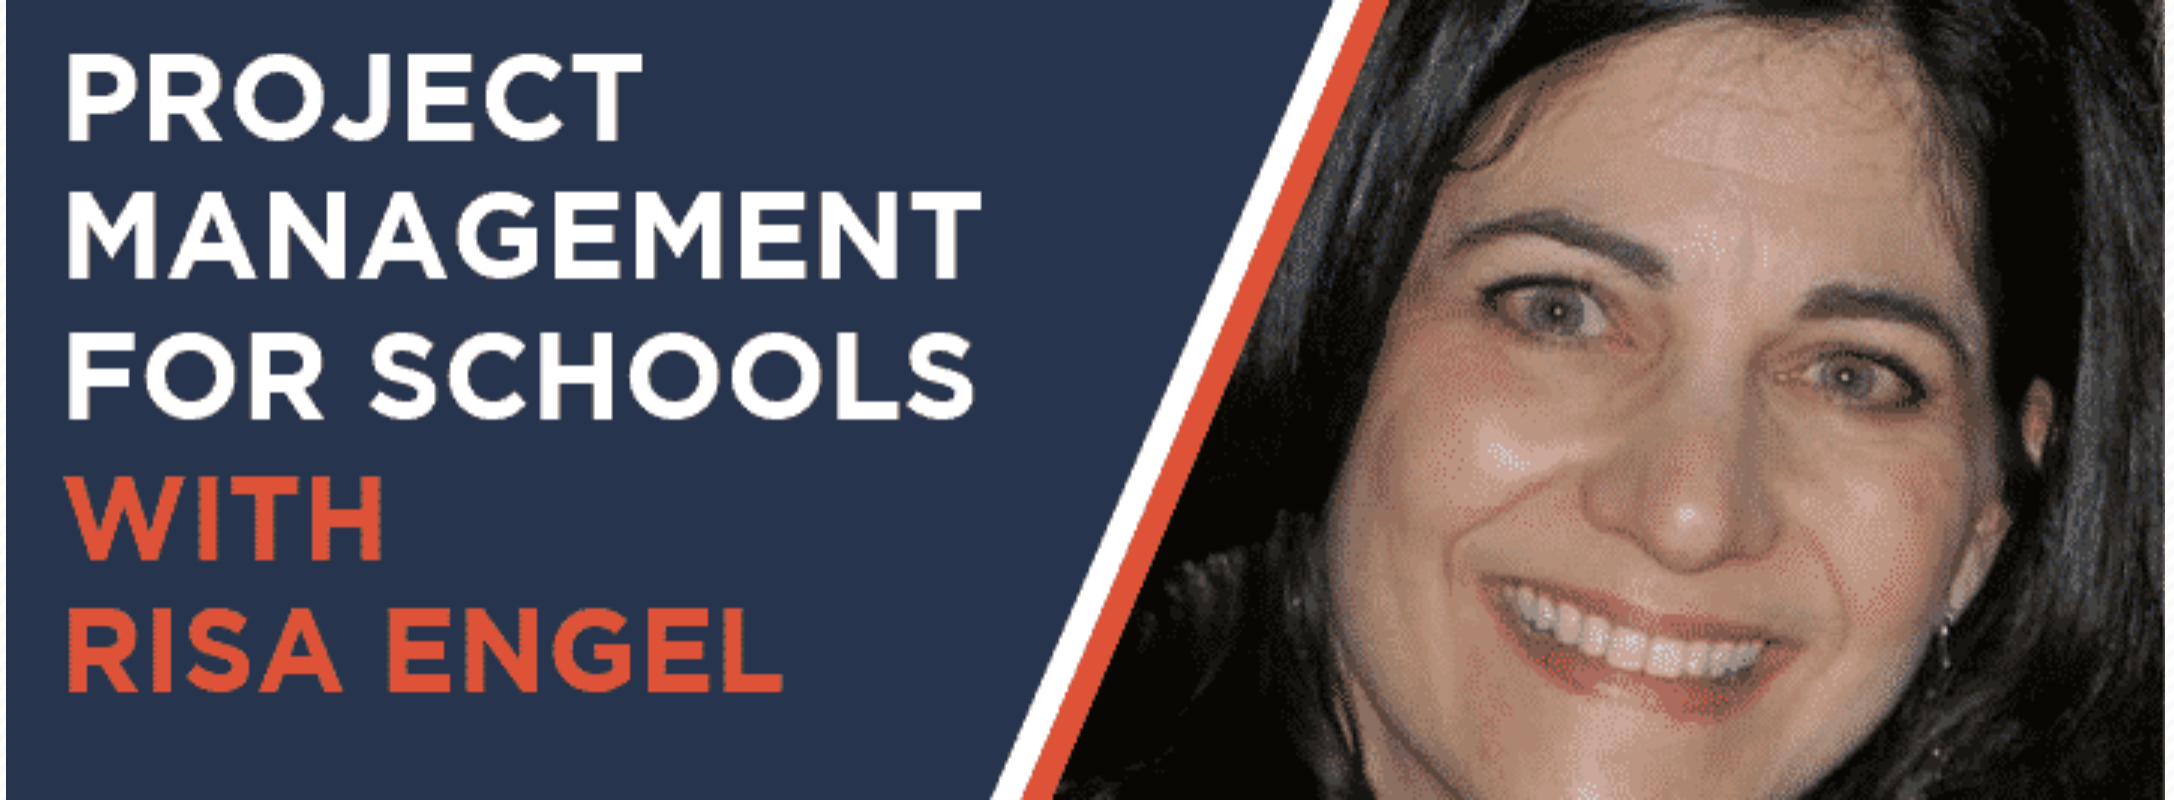 [PODCAST] SBfm19 – Project Management for Schools with Risa Engel